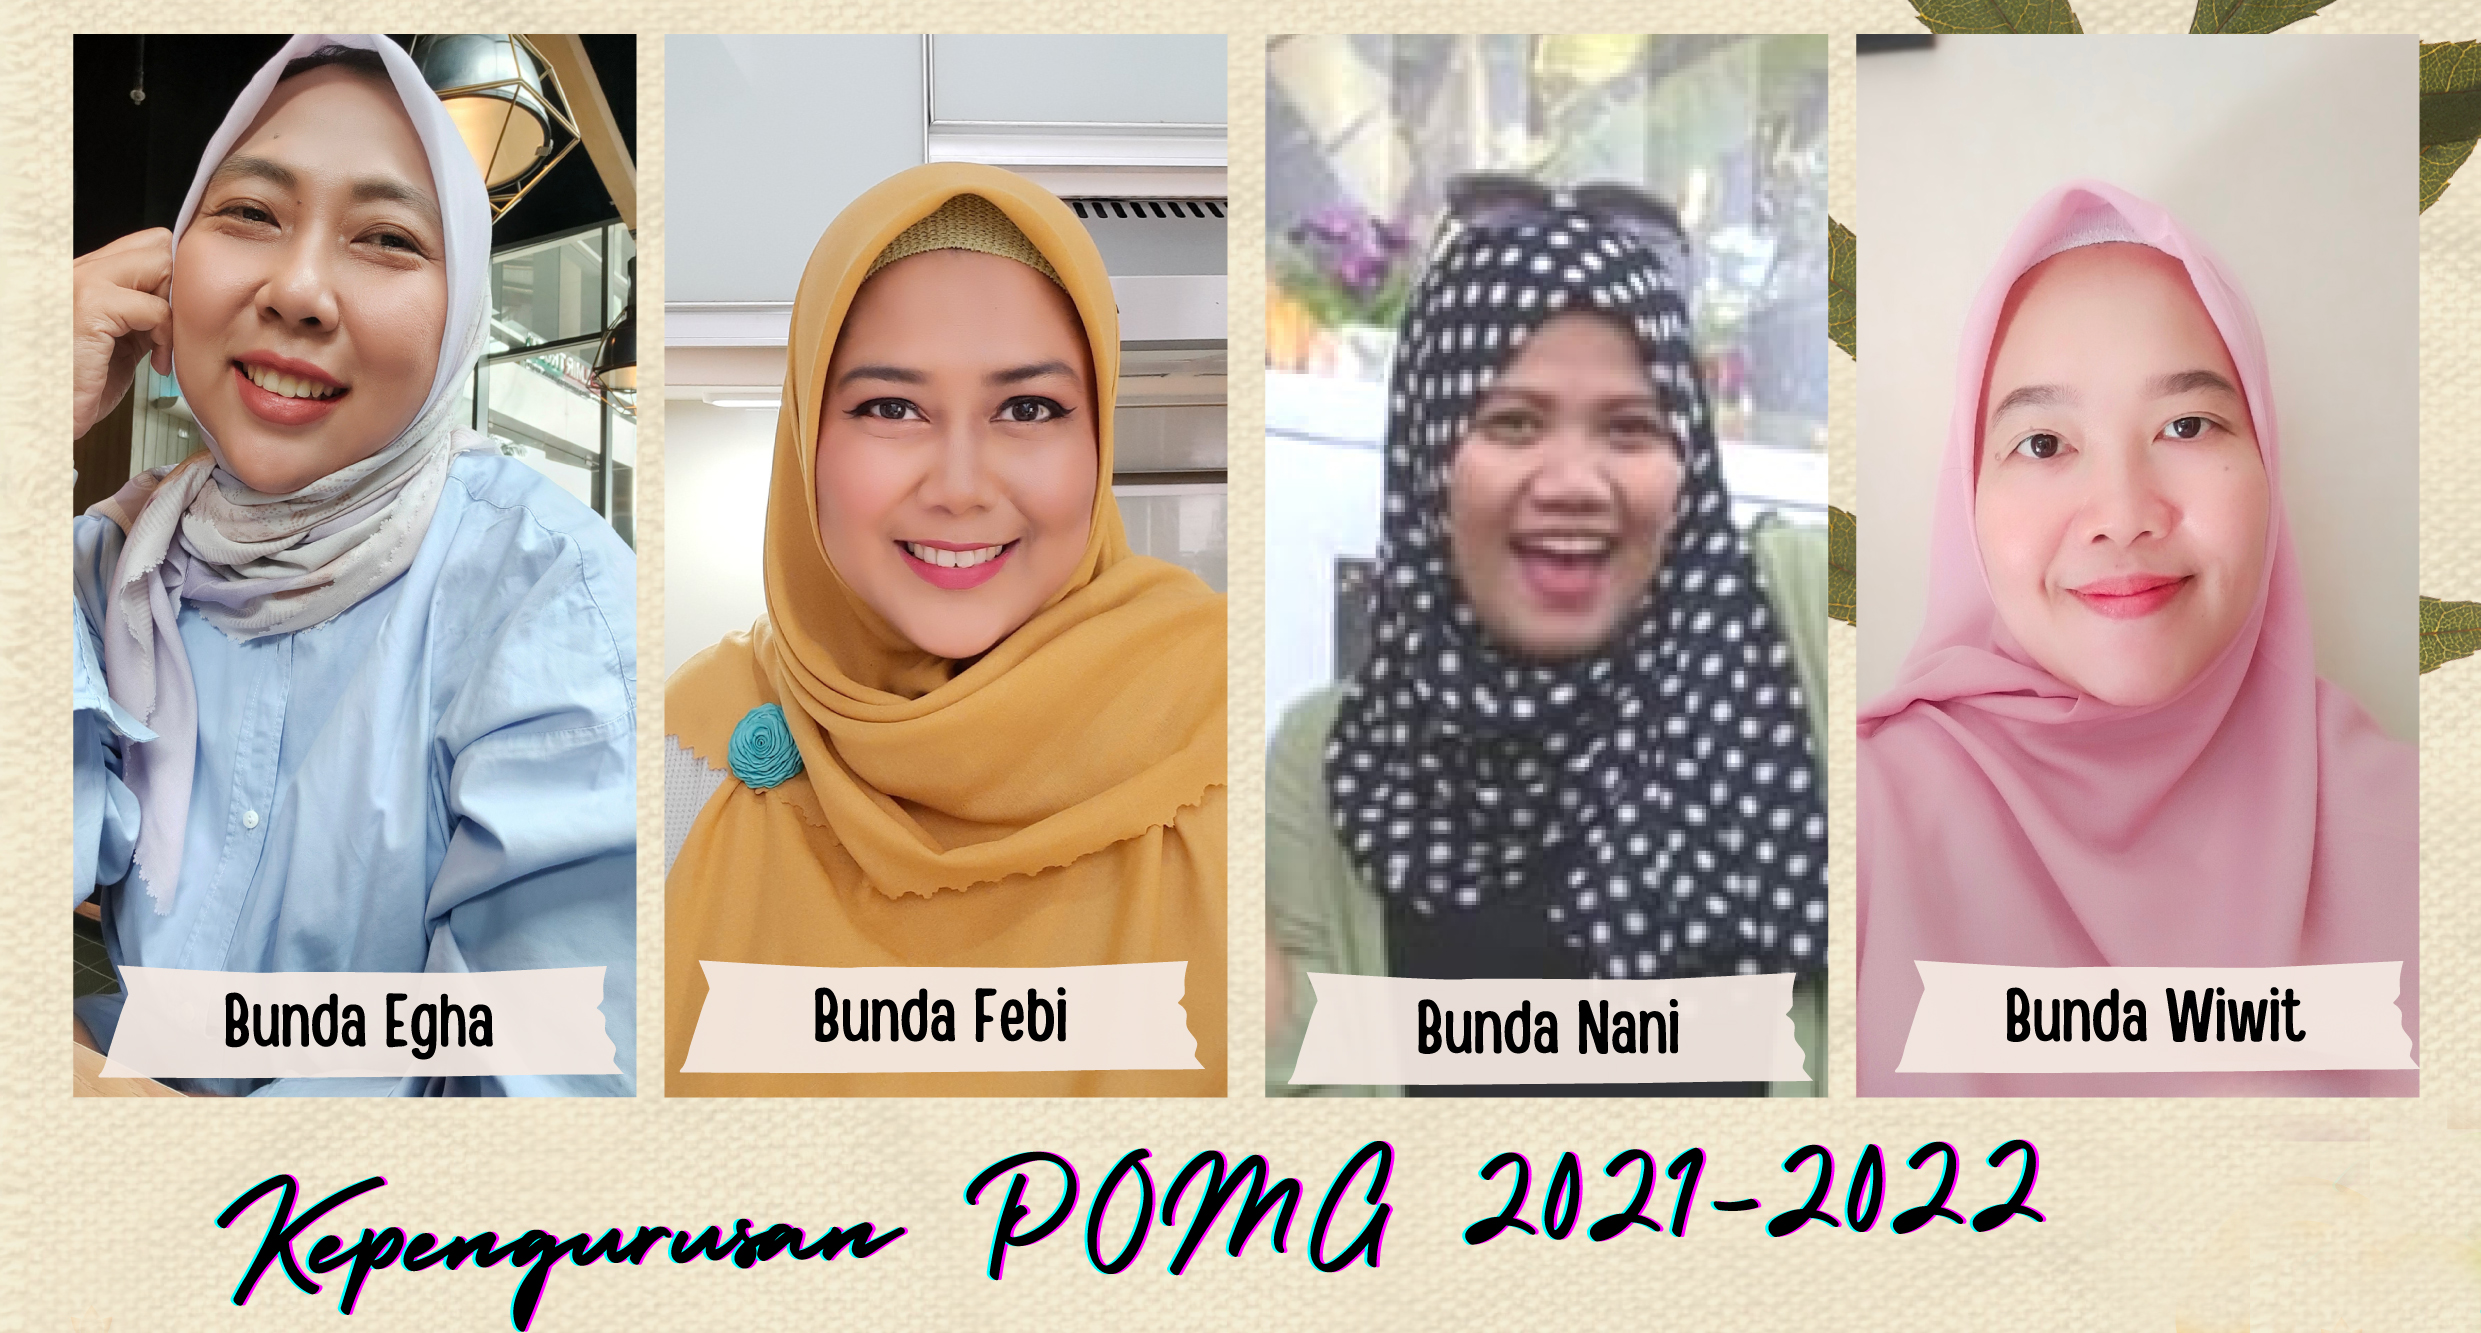 Kepengurusan POMG 2021-2022 Hello parents and kiddos! I’m Egha Dilaga (Elgio-level 2 Bougenvillea) from SD Tunas Unggul POMG and I’m truly happy to see you all even though only through […]